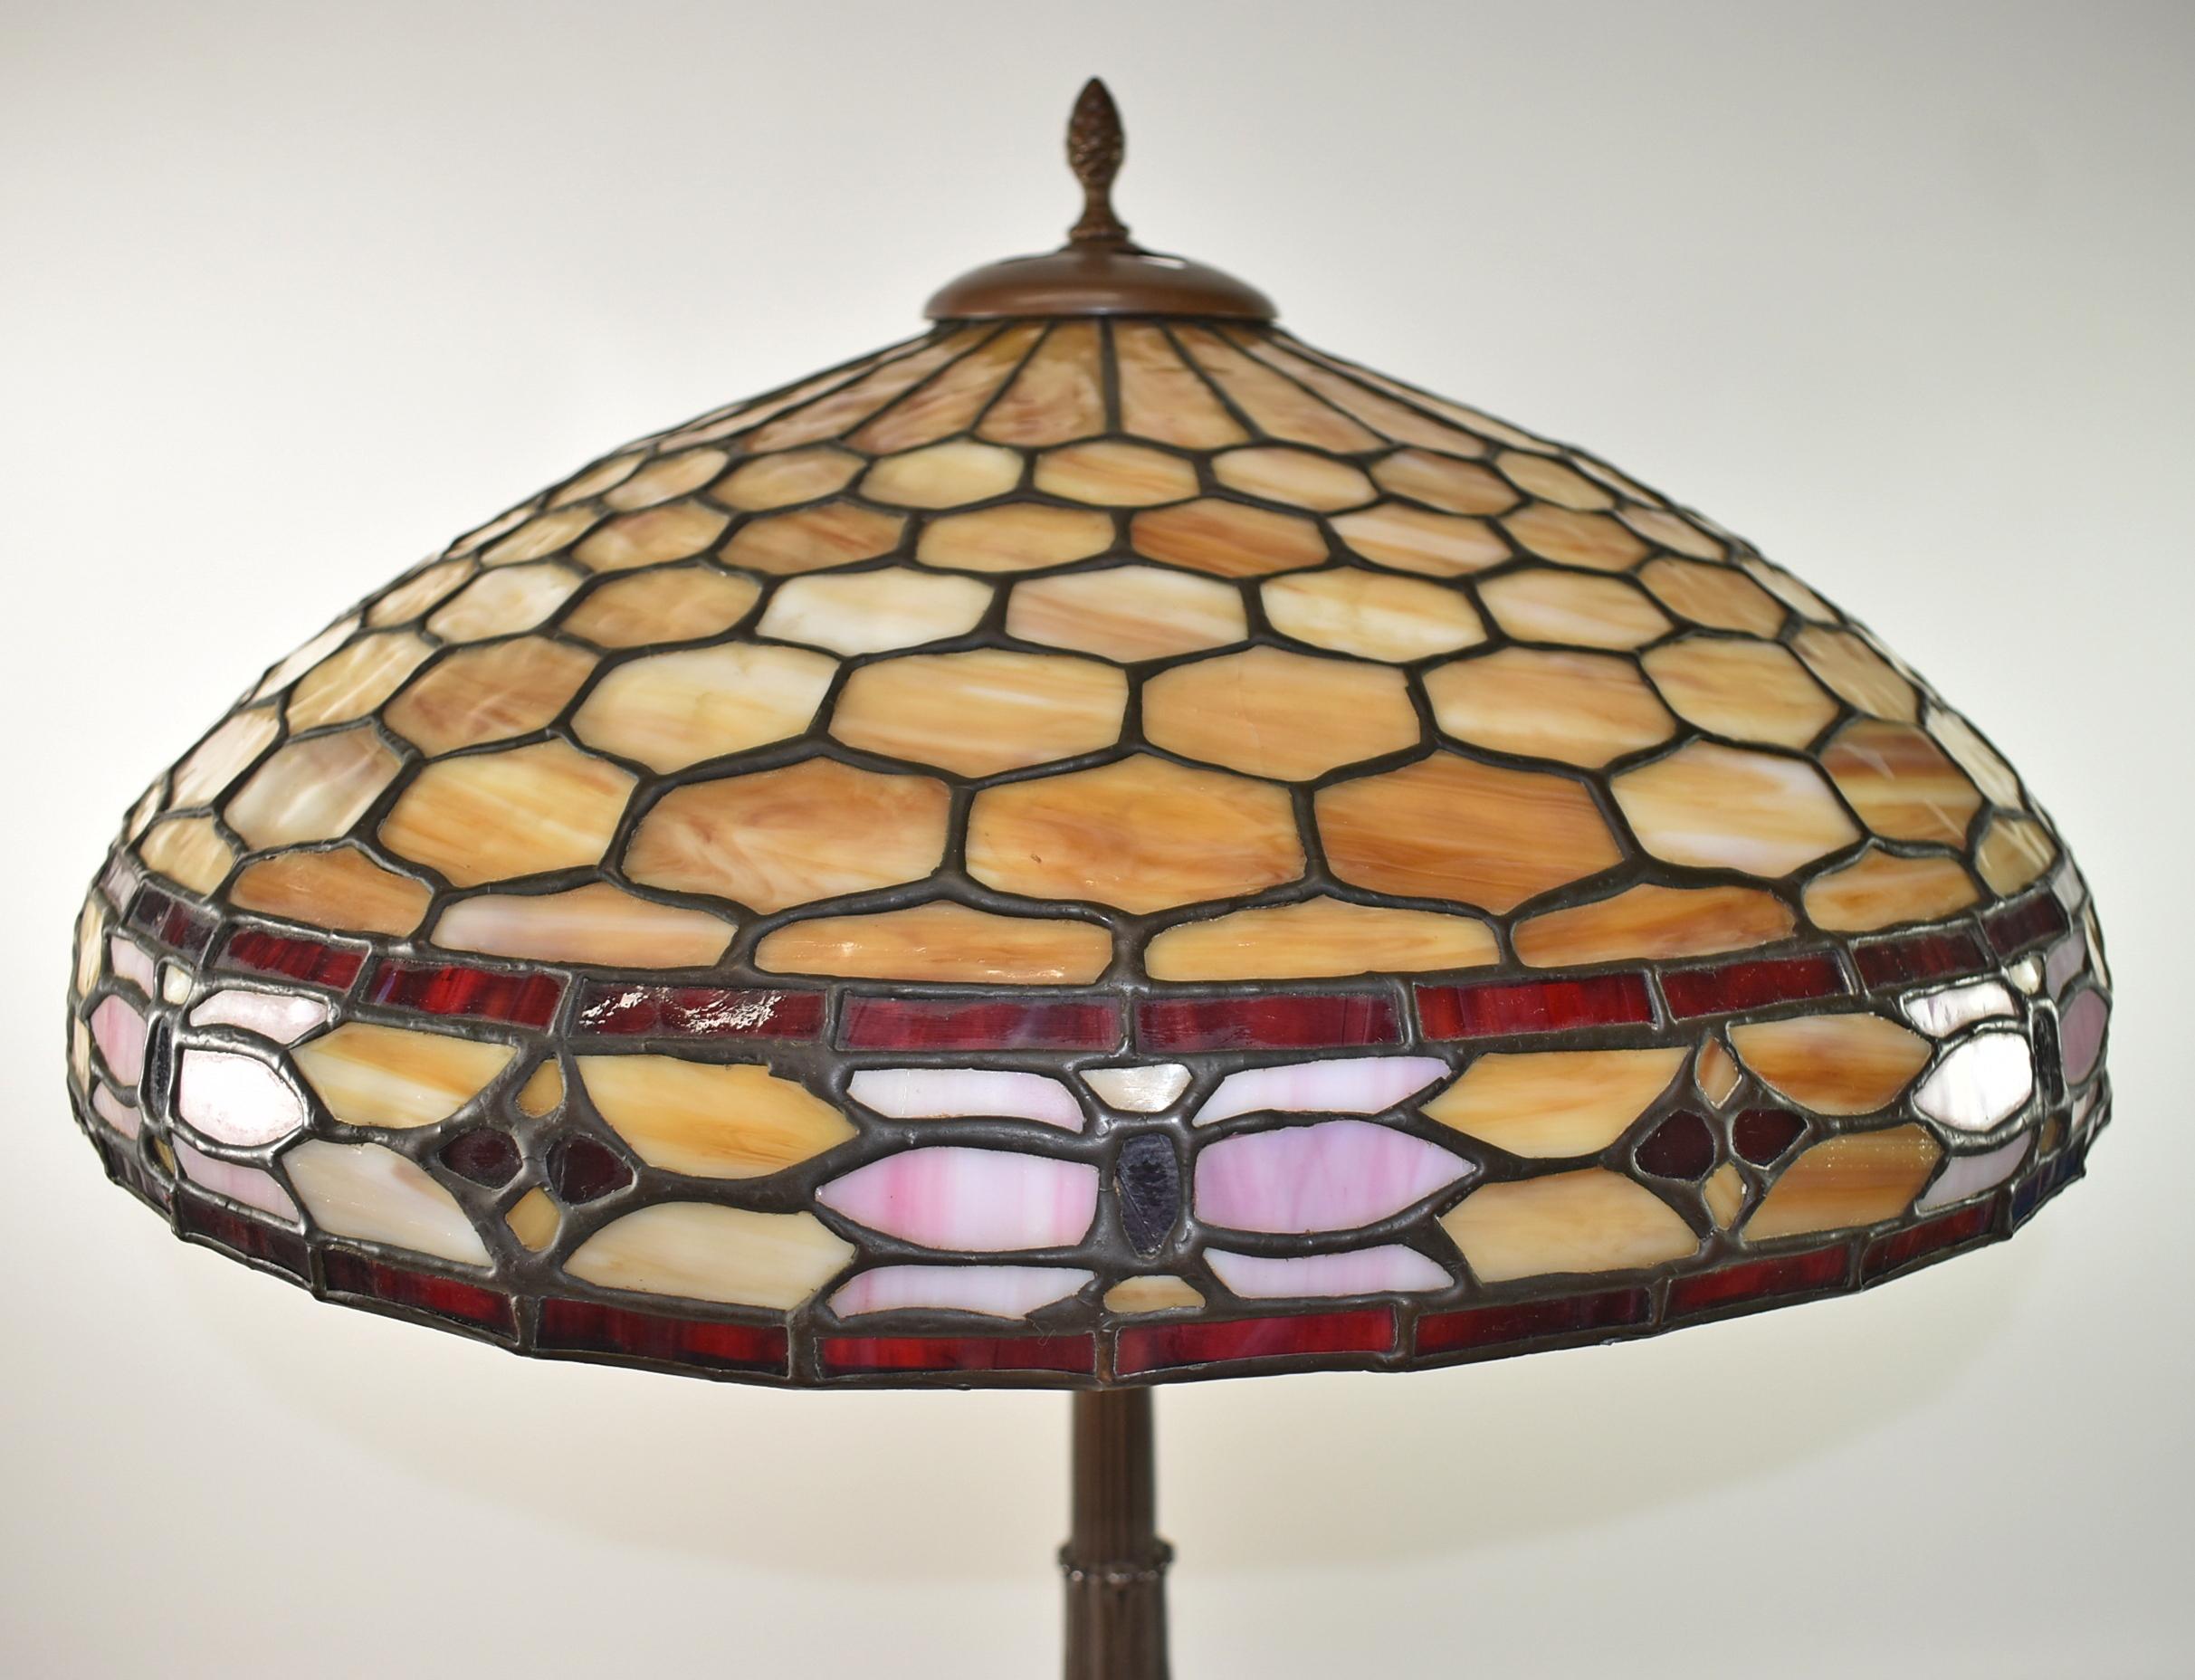 Duffner & Kimberly leaded stained glass and bamboo table lamp, circa 1920s. Honeycomb design with pink floral band edged in red with 3 loops inside shade and 6 tight cracks. Heart design cut into cap. Petal or leaf design and ball pulls. Bronze